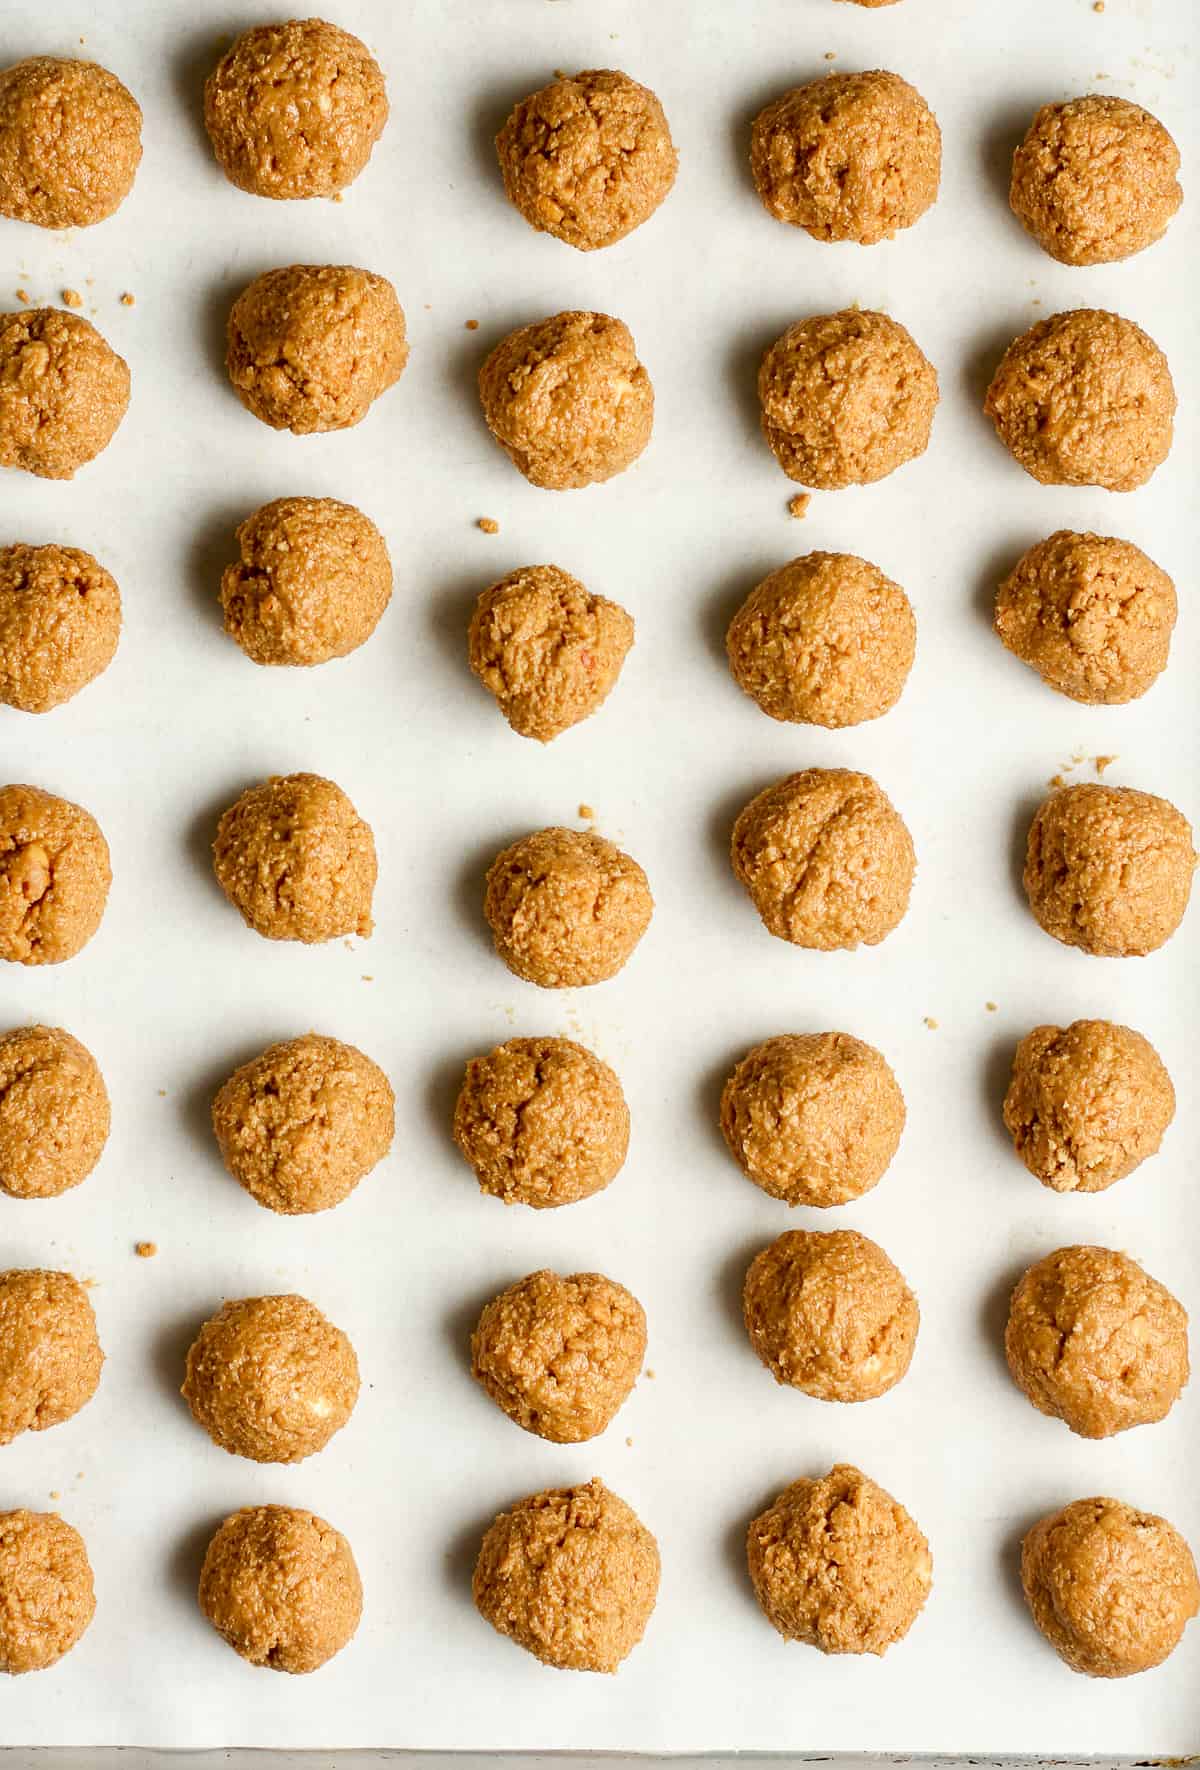 A tray of rolled peanut butter balls.